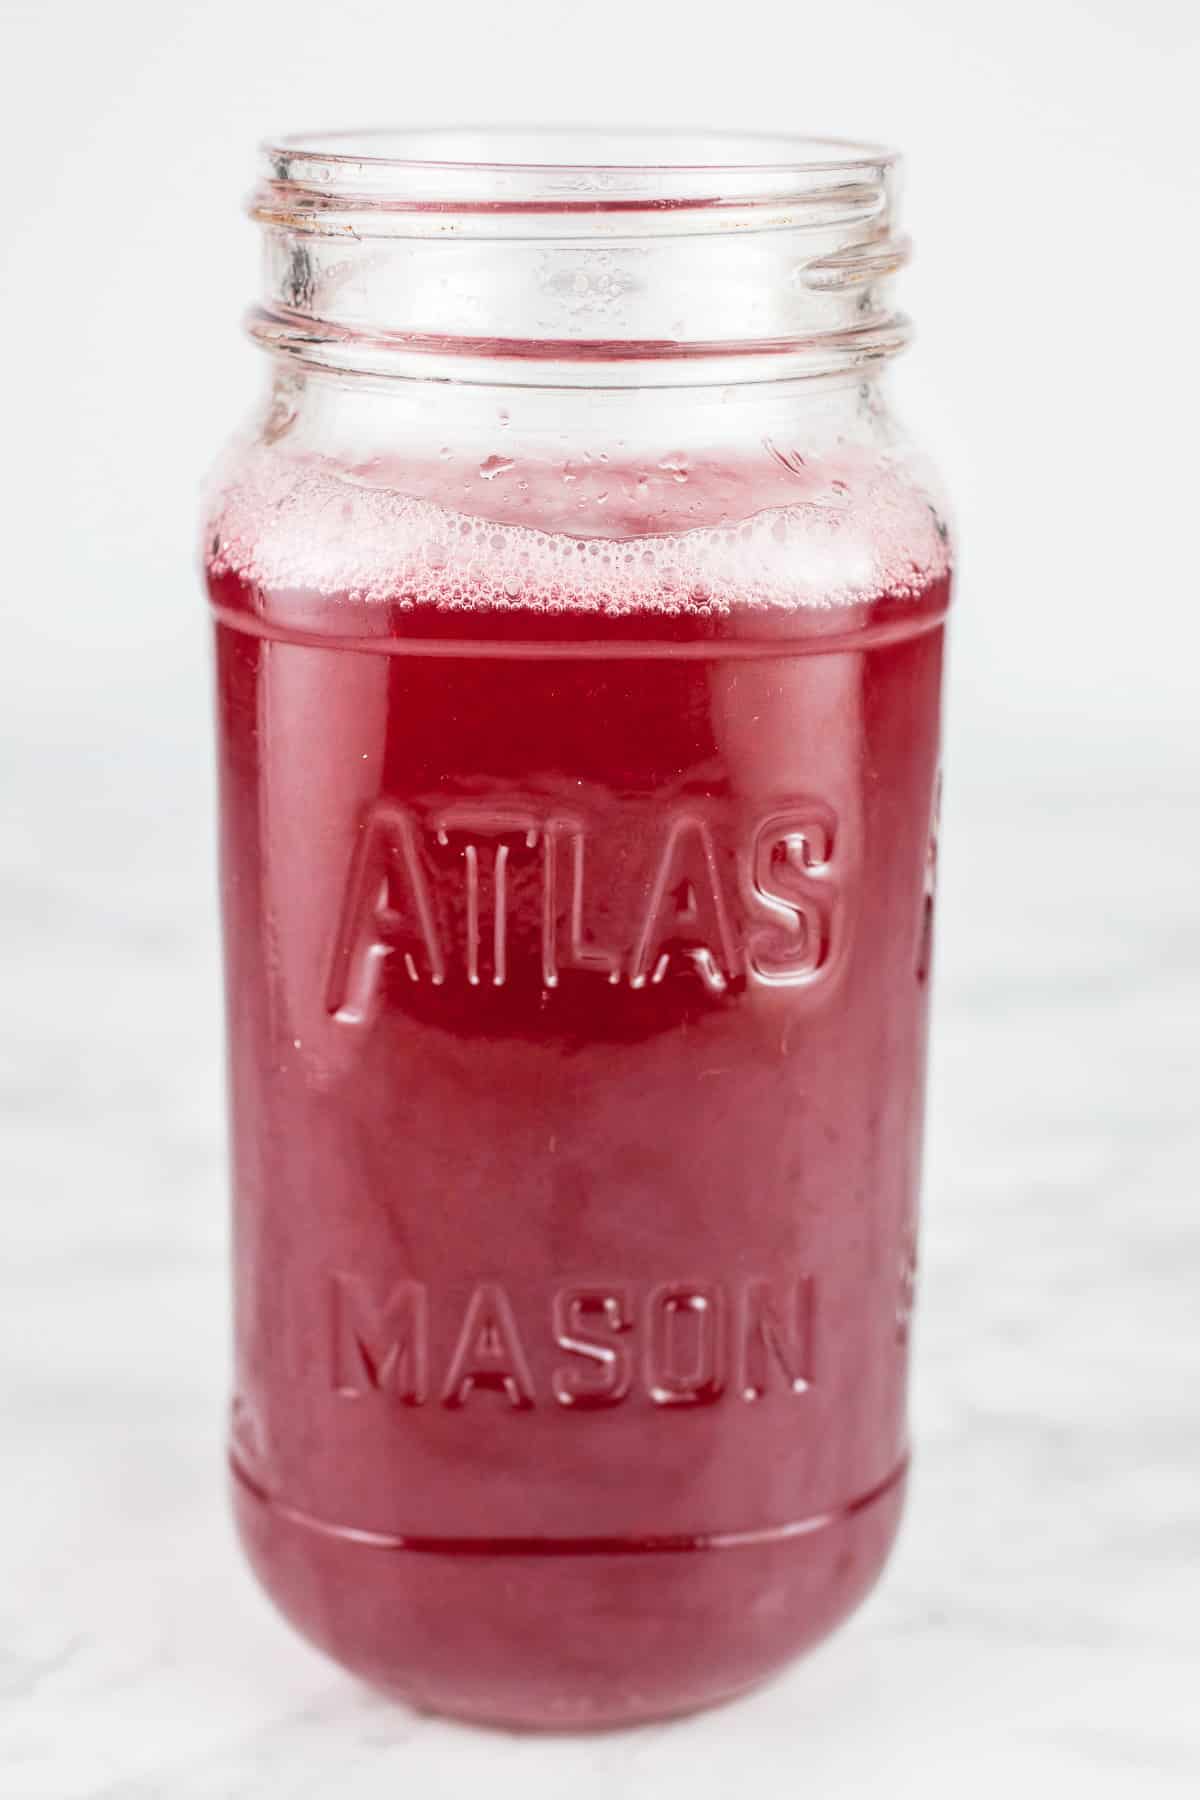 Raspberry cordial syrup in mason jar on white surface.